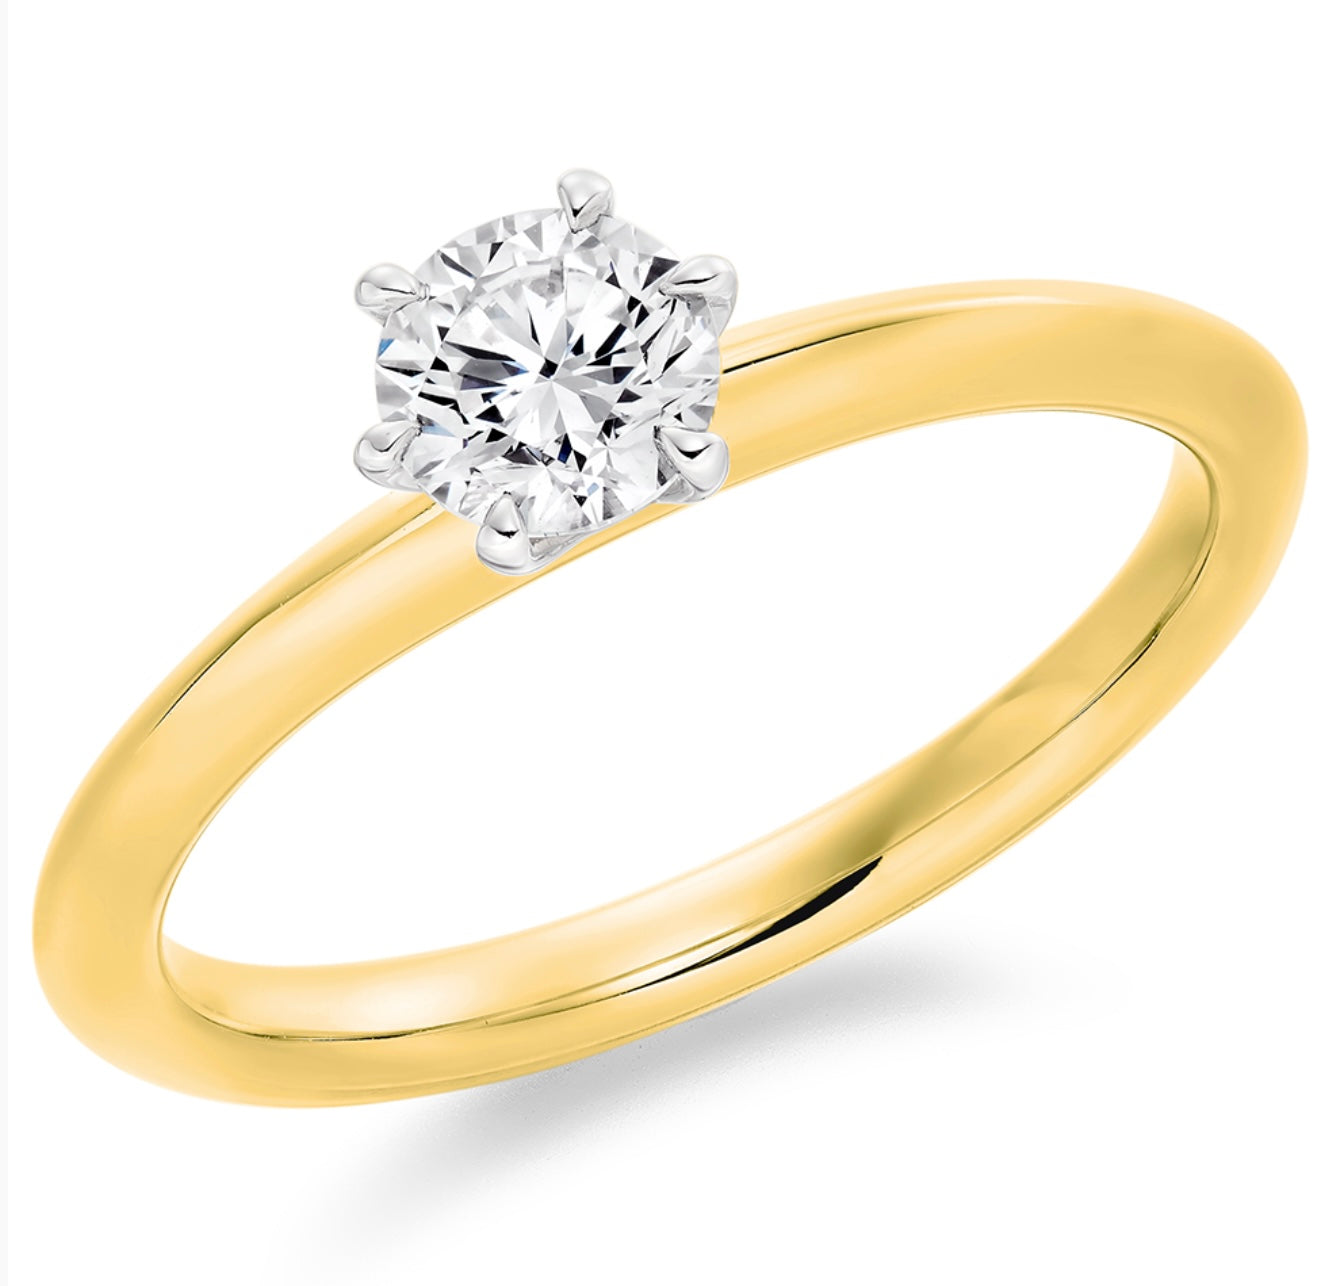 18ct yellow gold round brilliant cut certified diamond set into a 6 claw knife edge shoulder solitaire ring